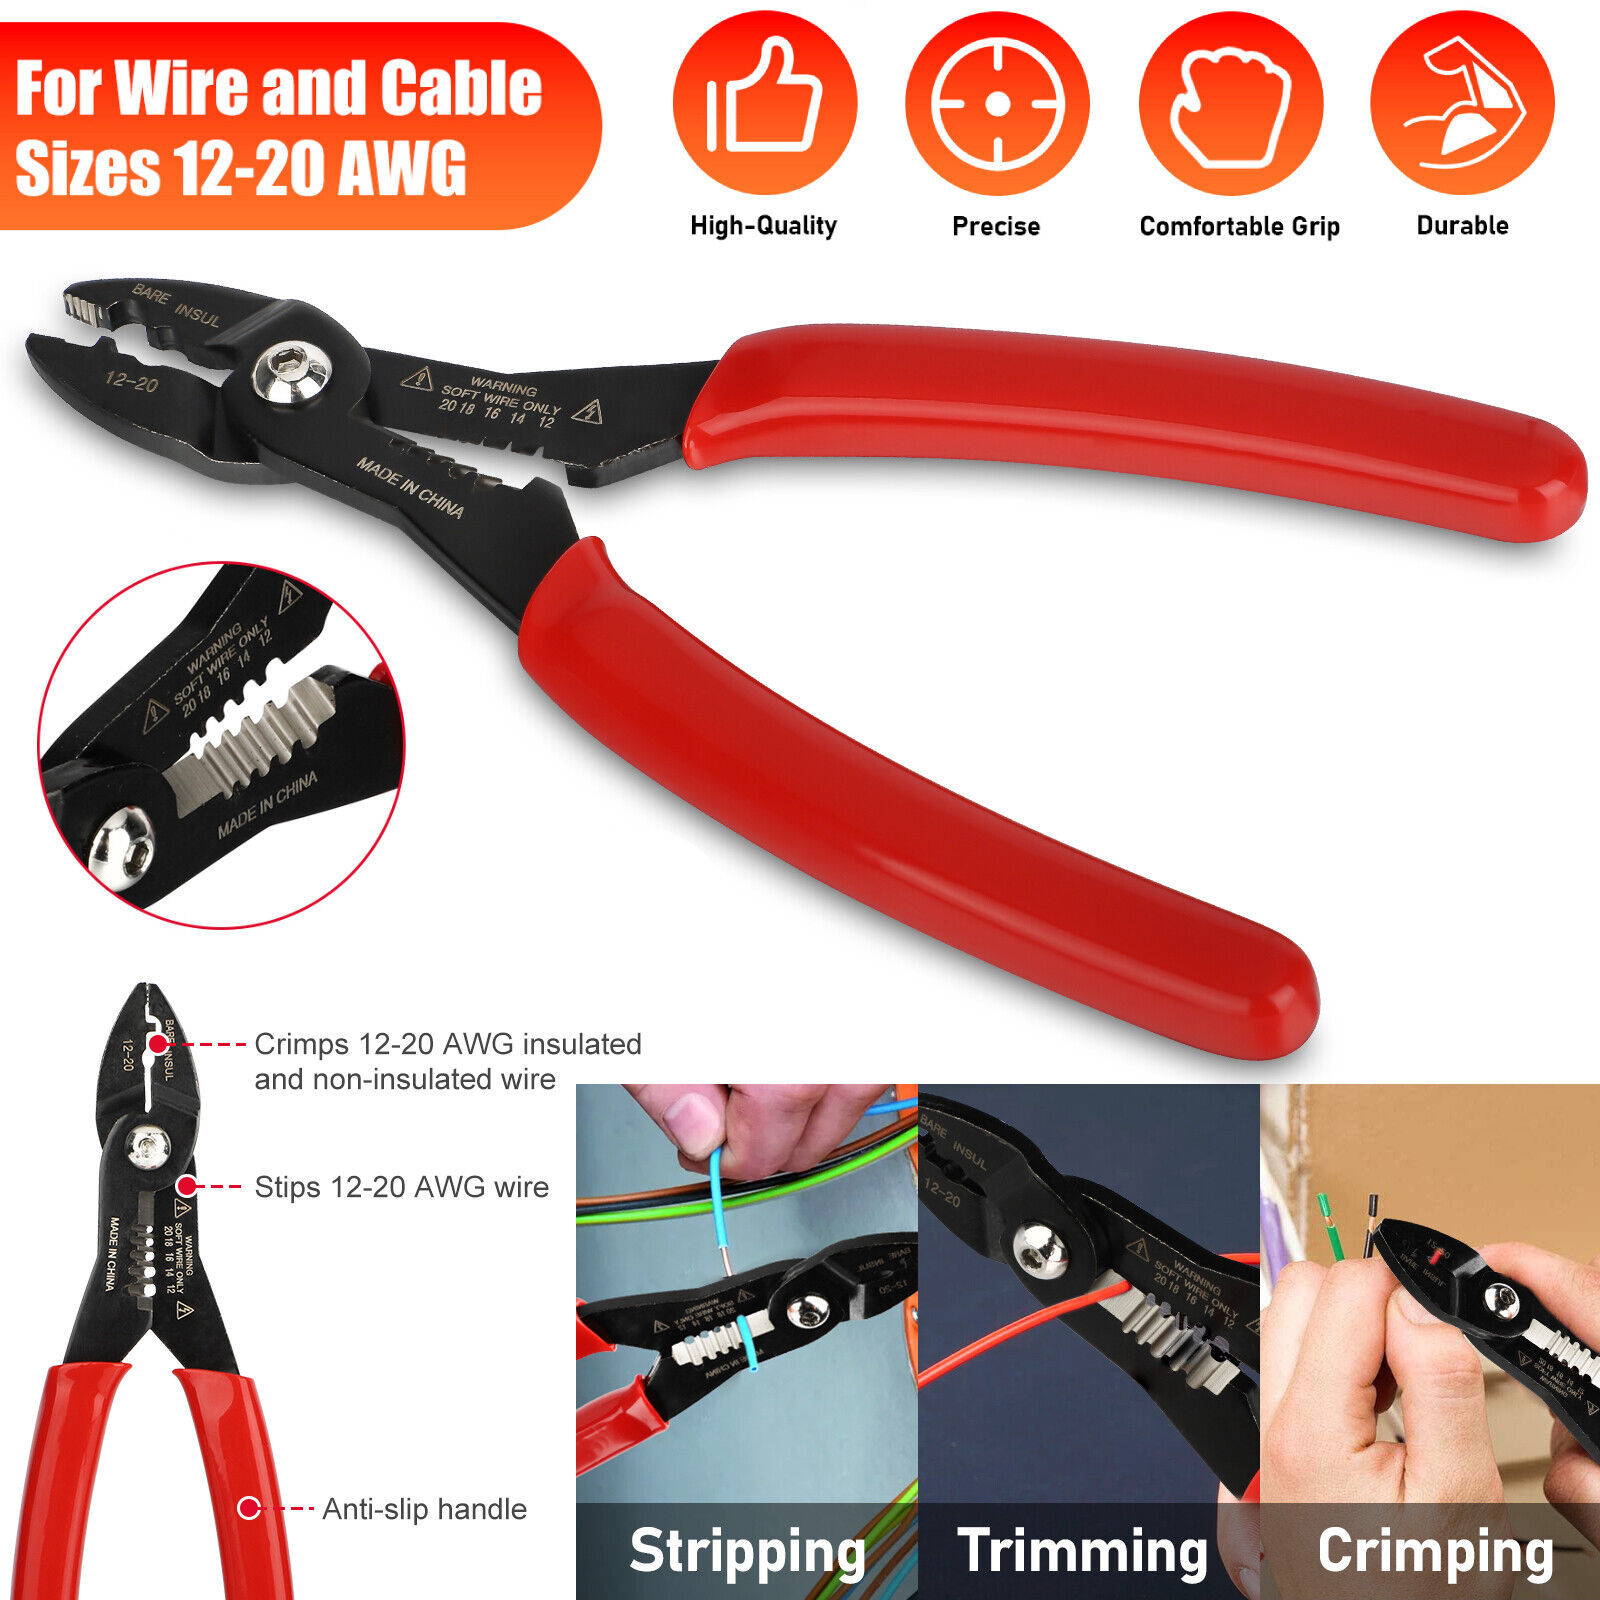 4In1 Wire Electricians Plier Crimper Stripper Cutter Gripping For 12-20Awg Cable - $25.99